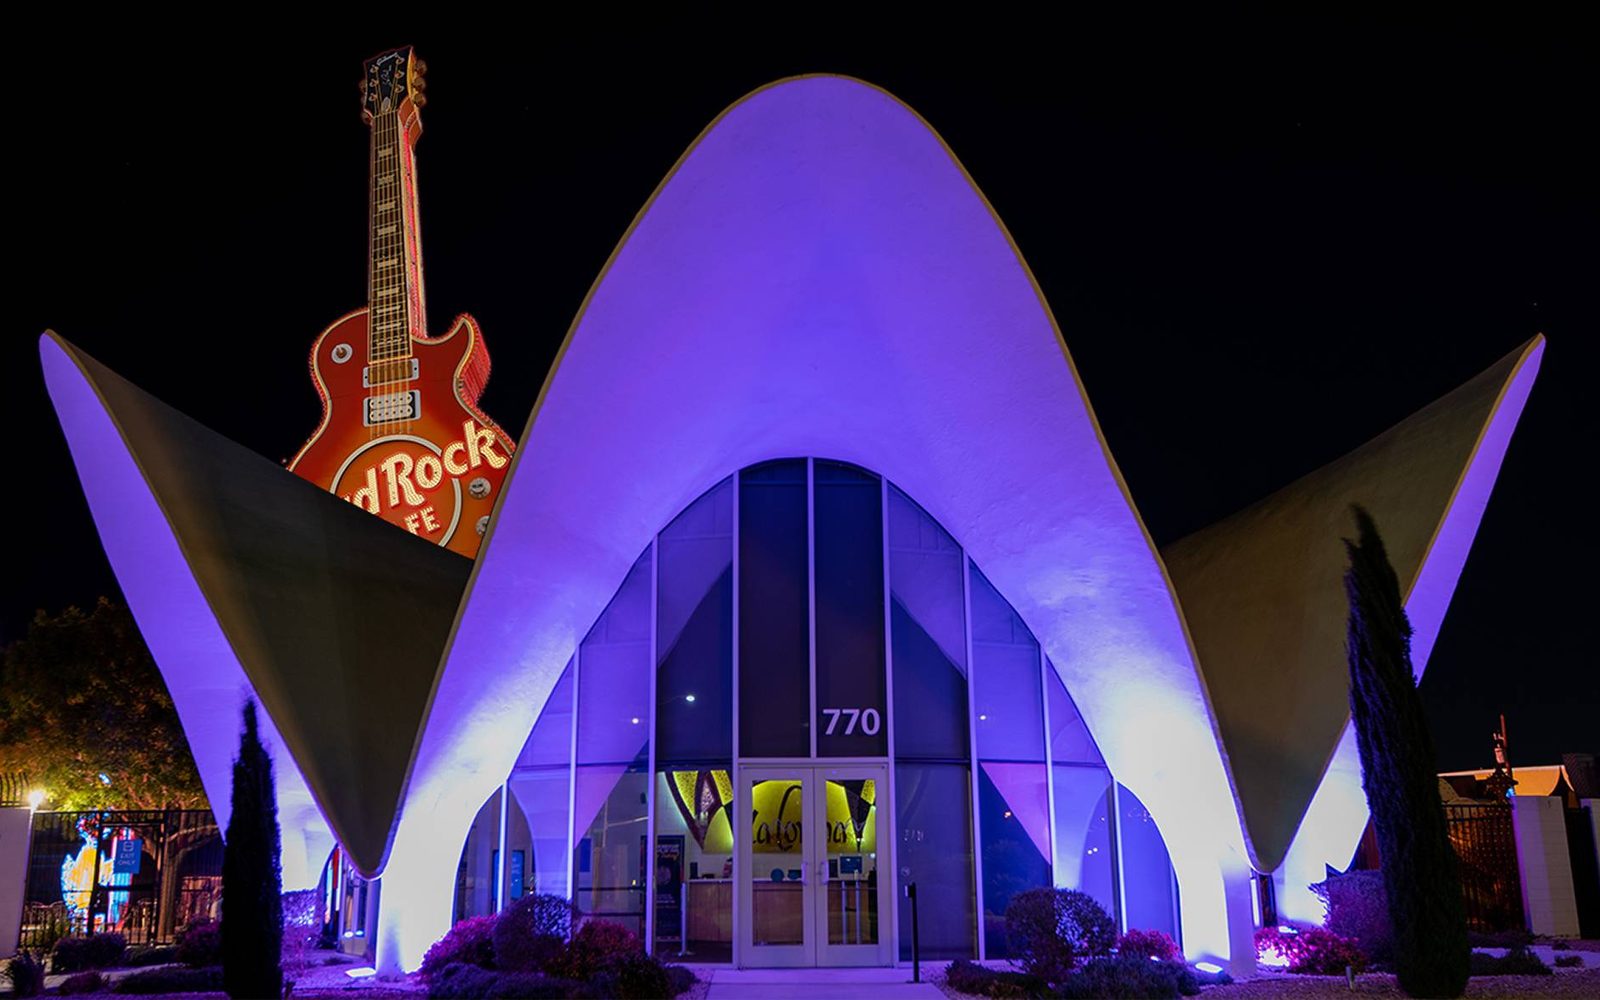 La Concha Lobby at night in purple with Hard Rock guitar in background